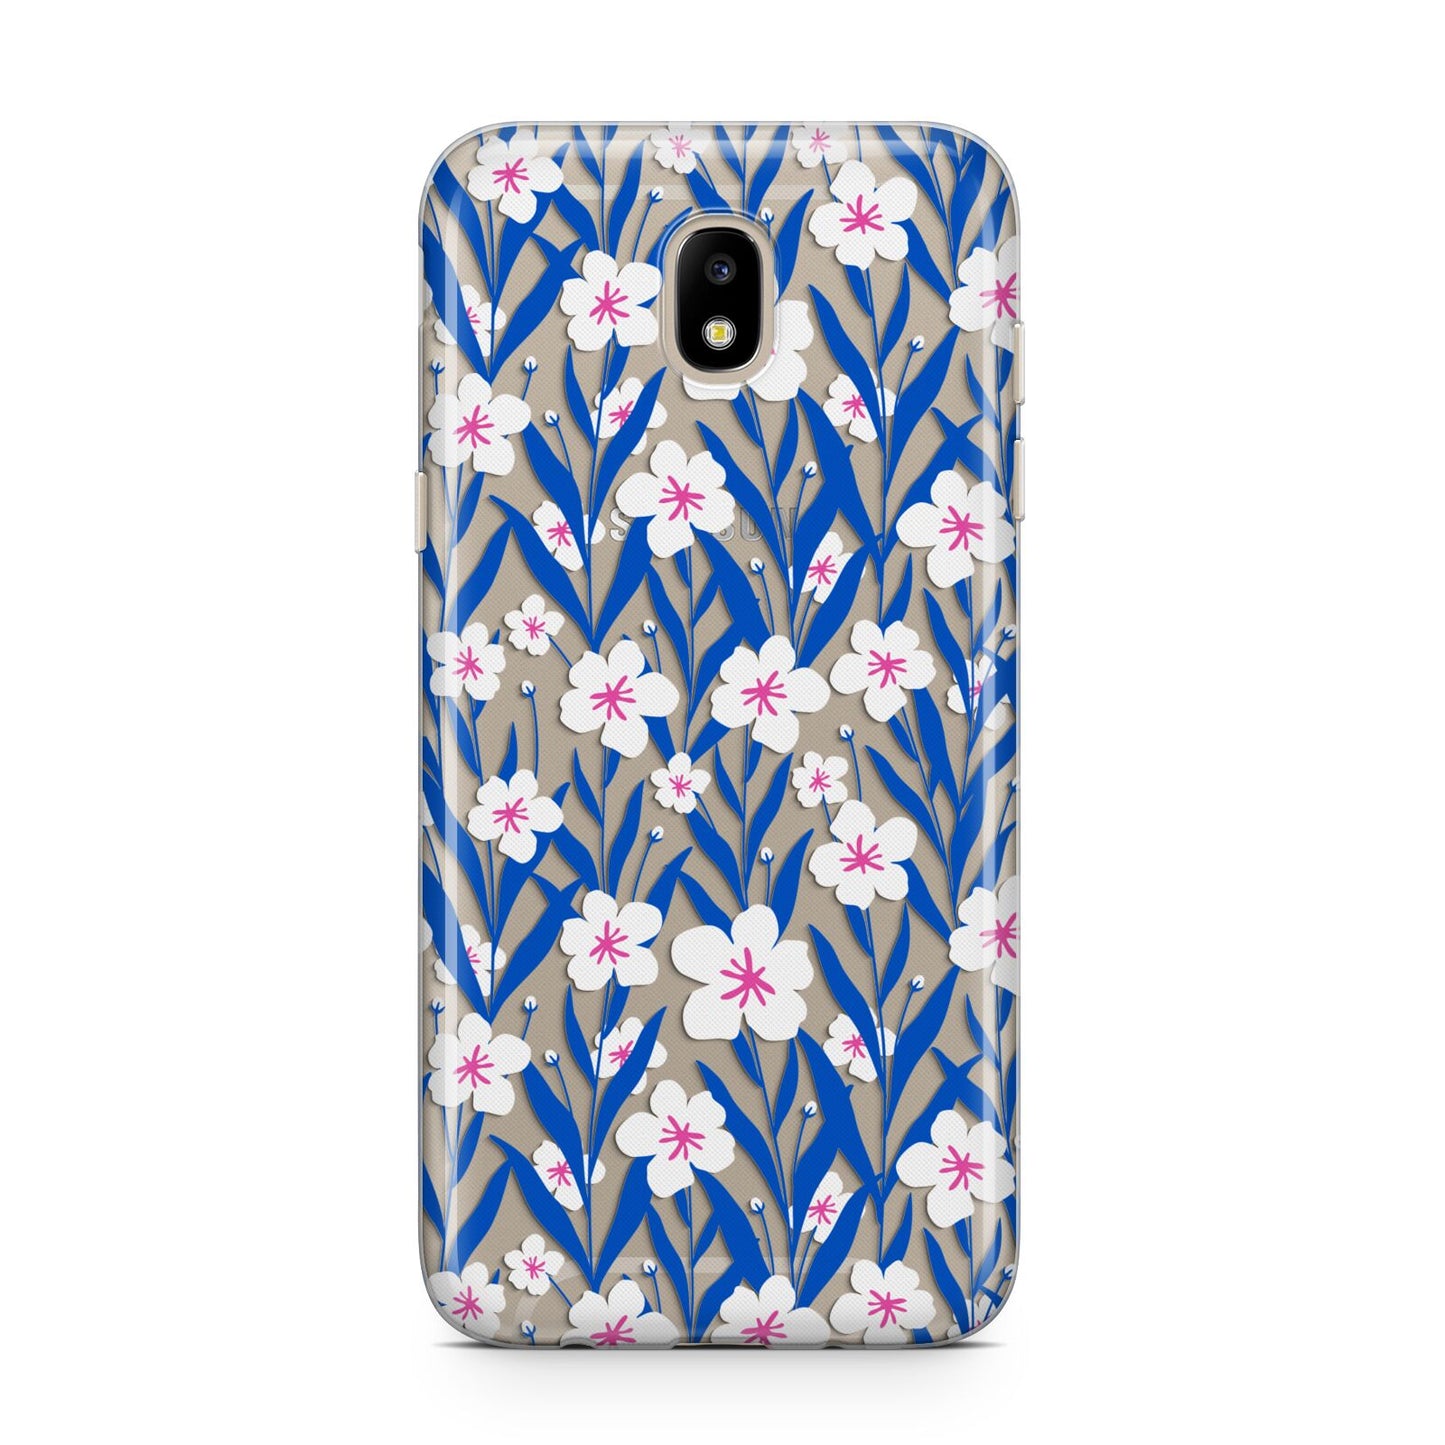 Blue and White Flowers Samsung J5 2017 Case